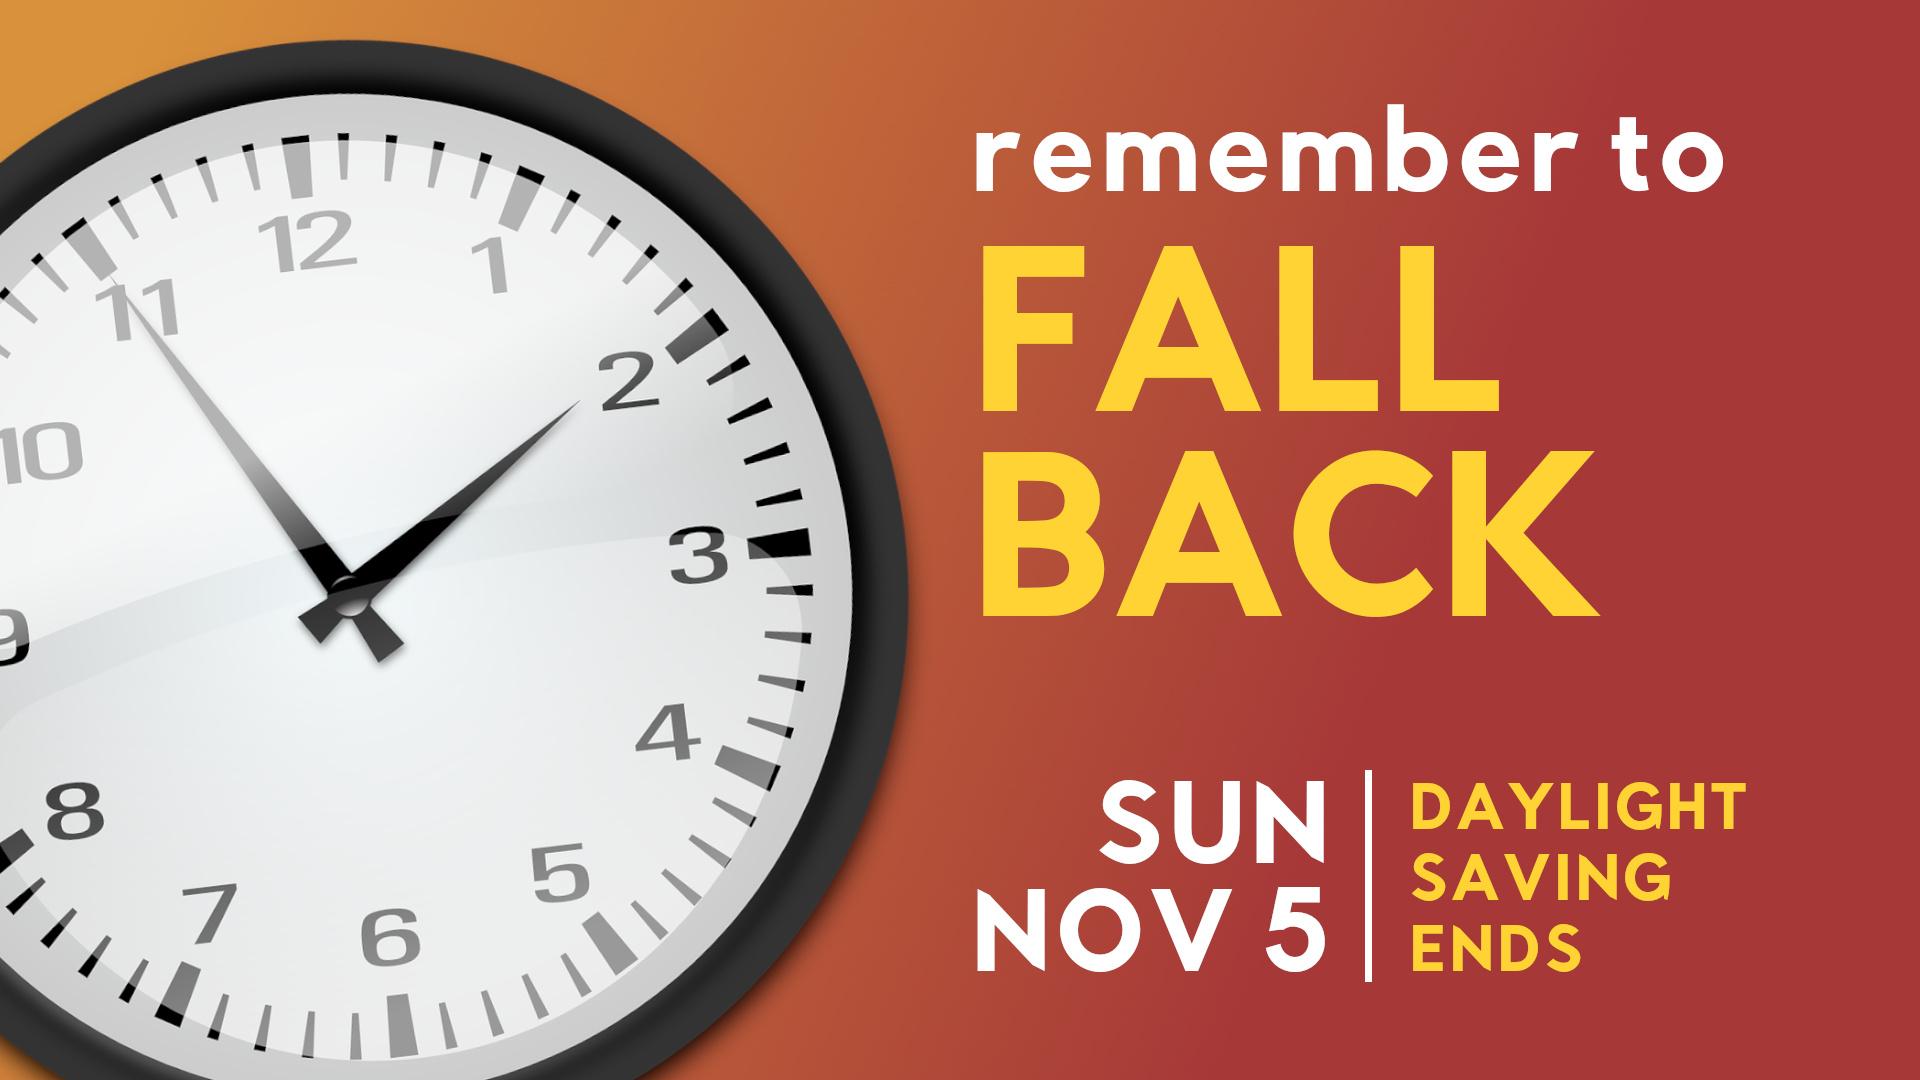 Daylight Saving Time ends, fall back and move your clocks back one hour.